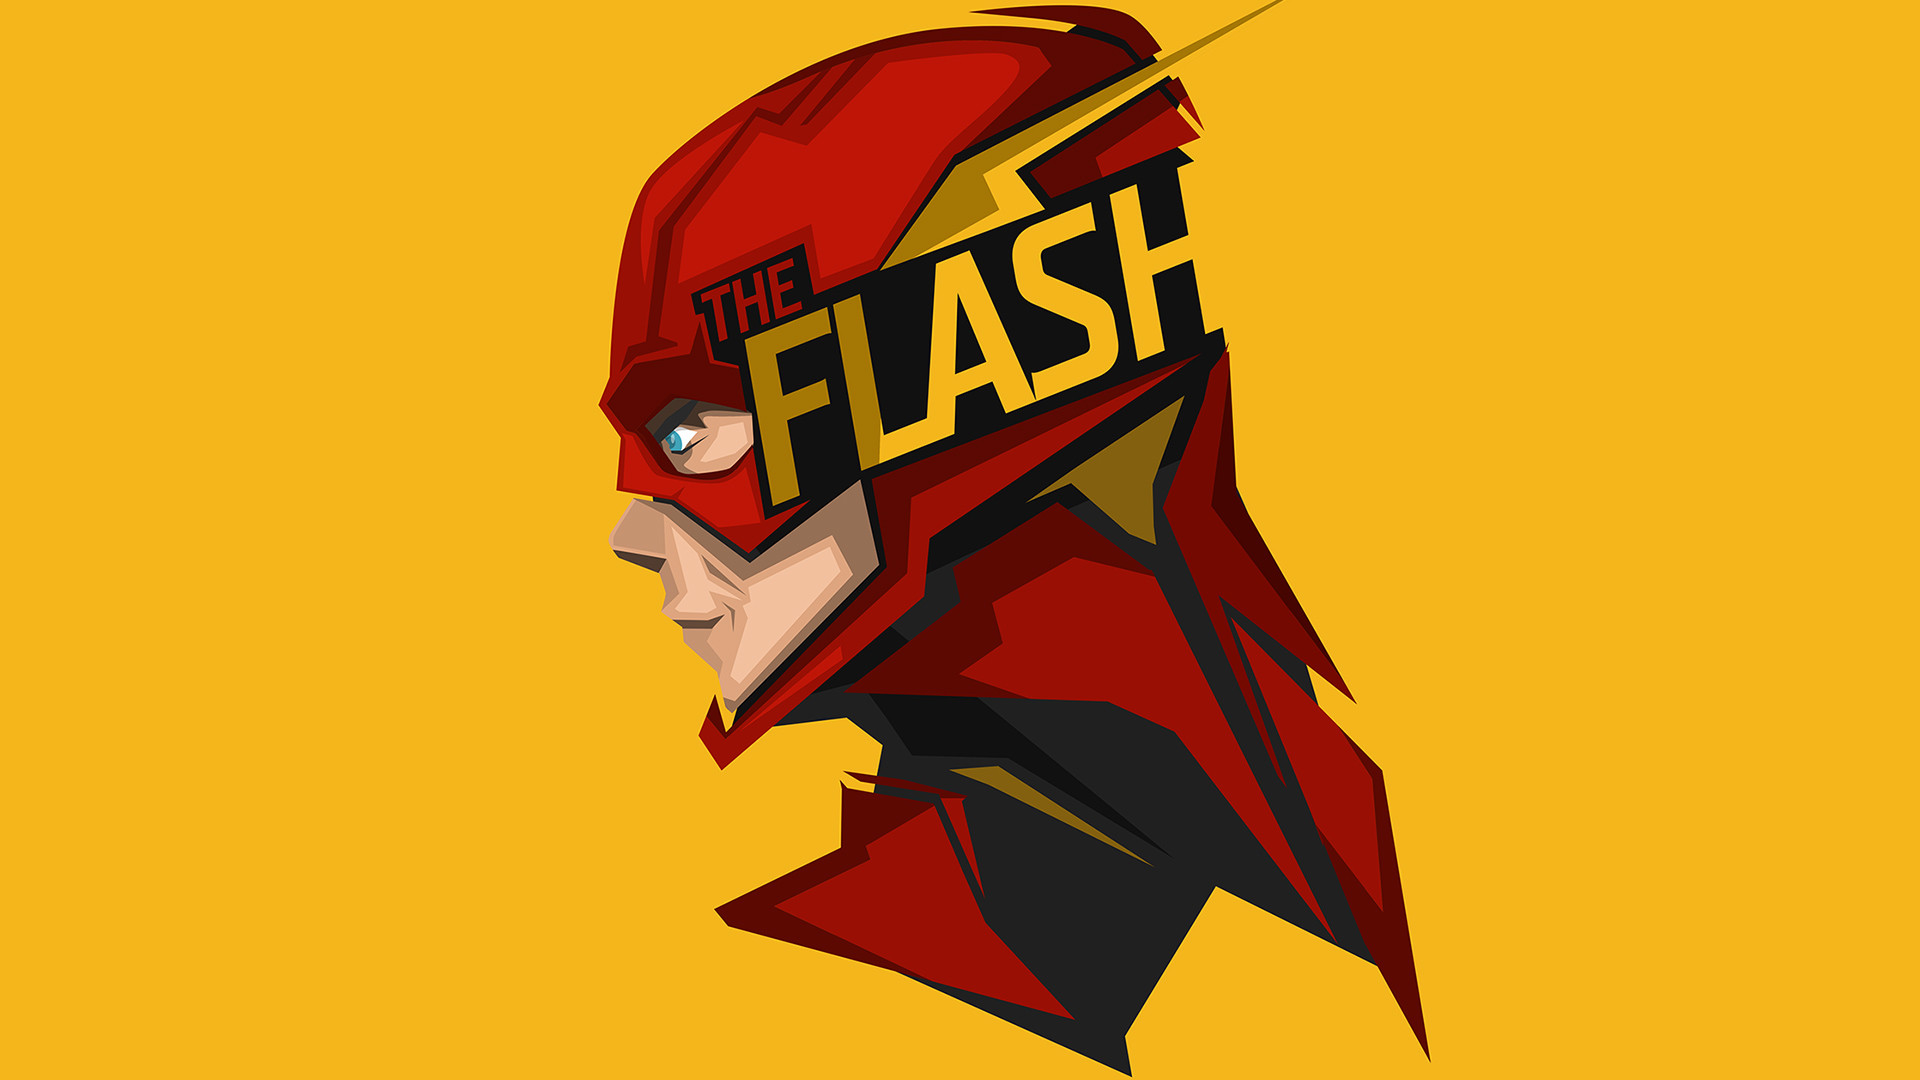 Download The Once and Future Flash 2017 HD